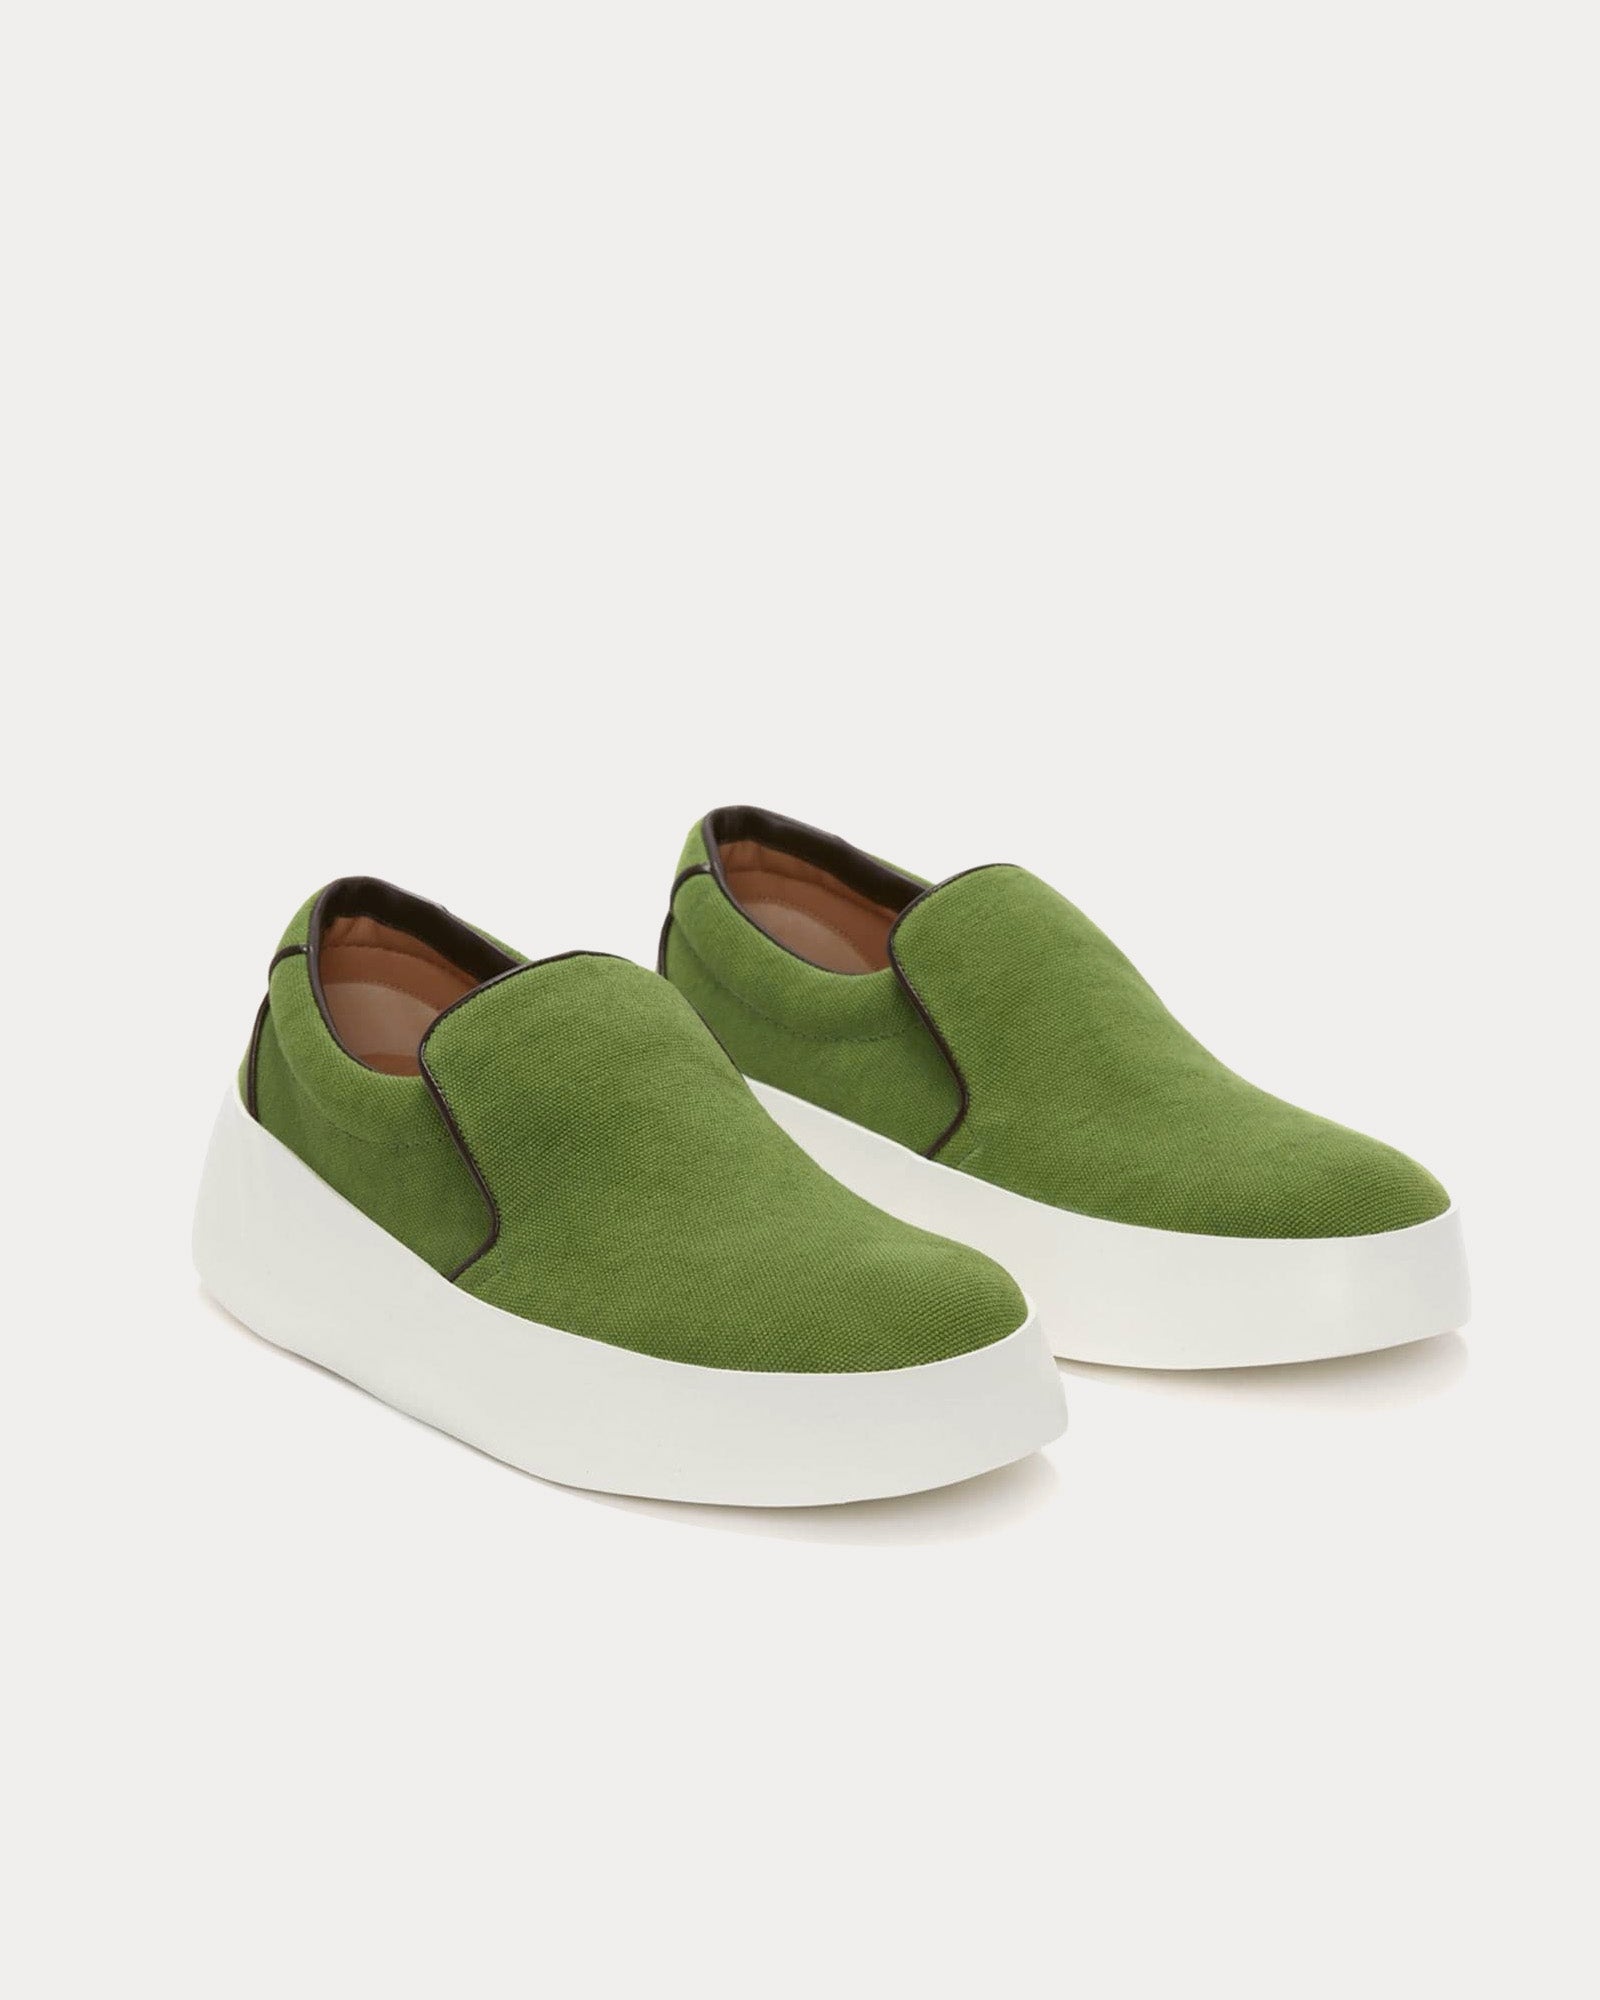 JW Anderson - Leather Green Slip On Sneakers